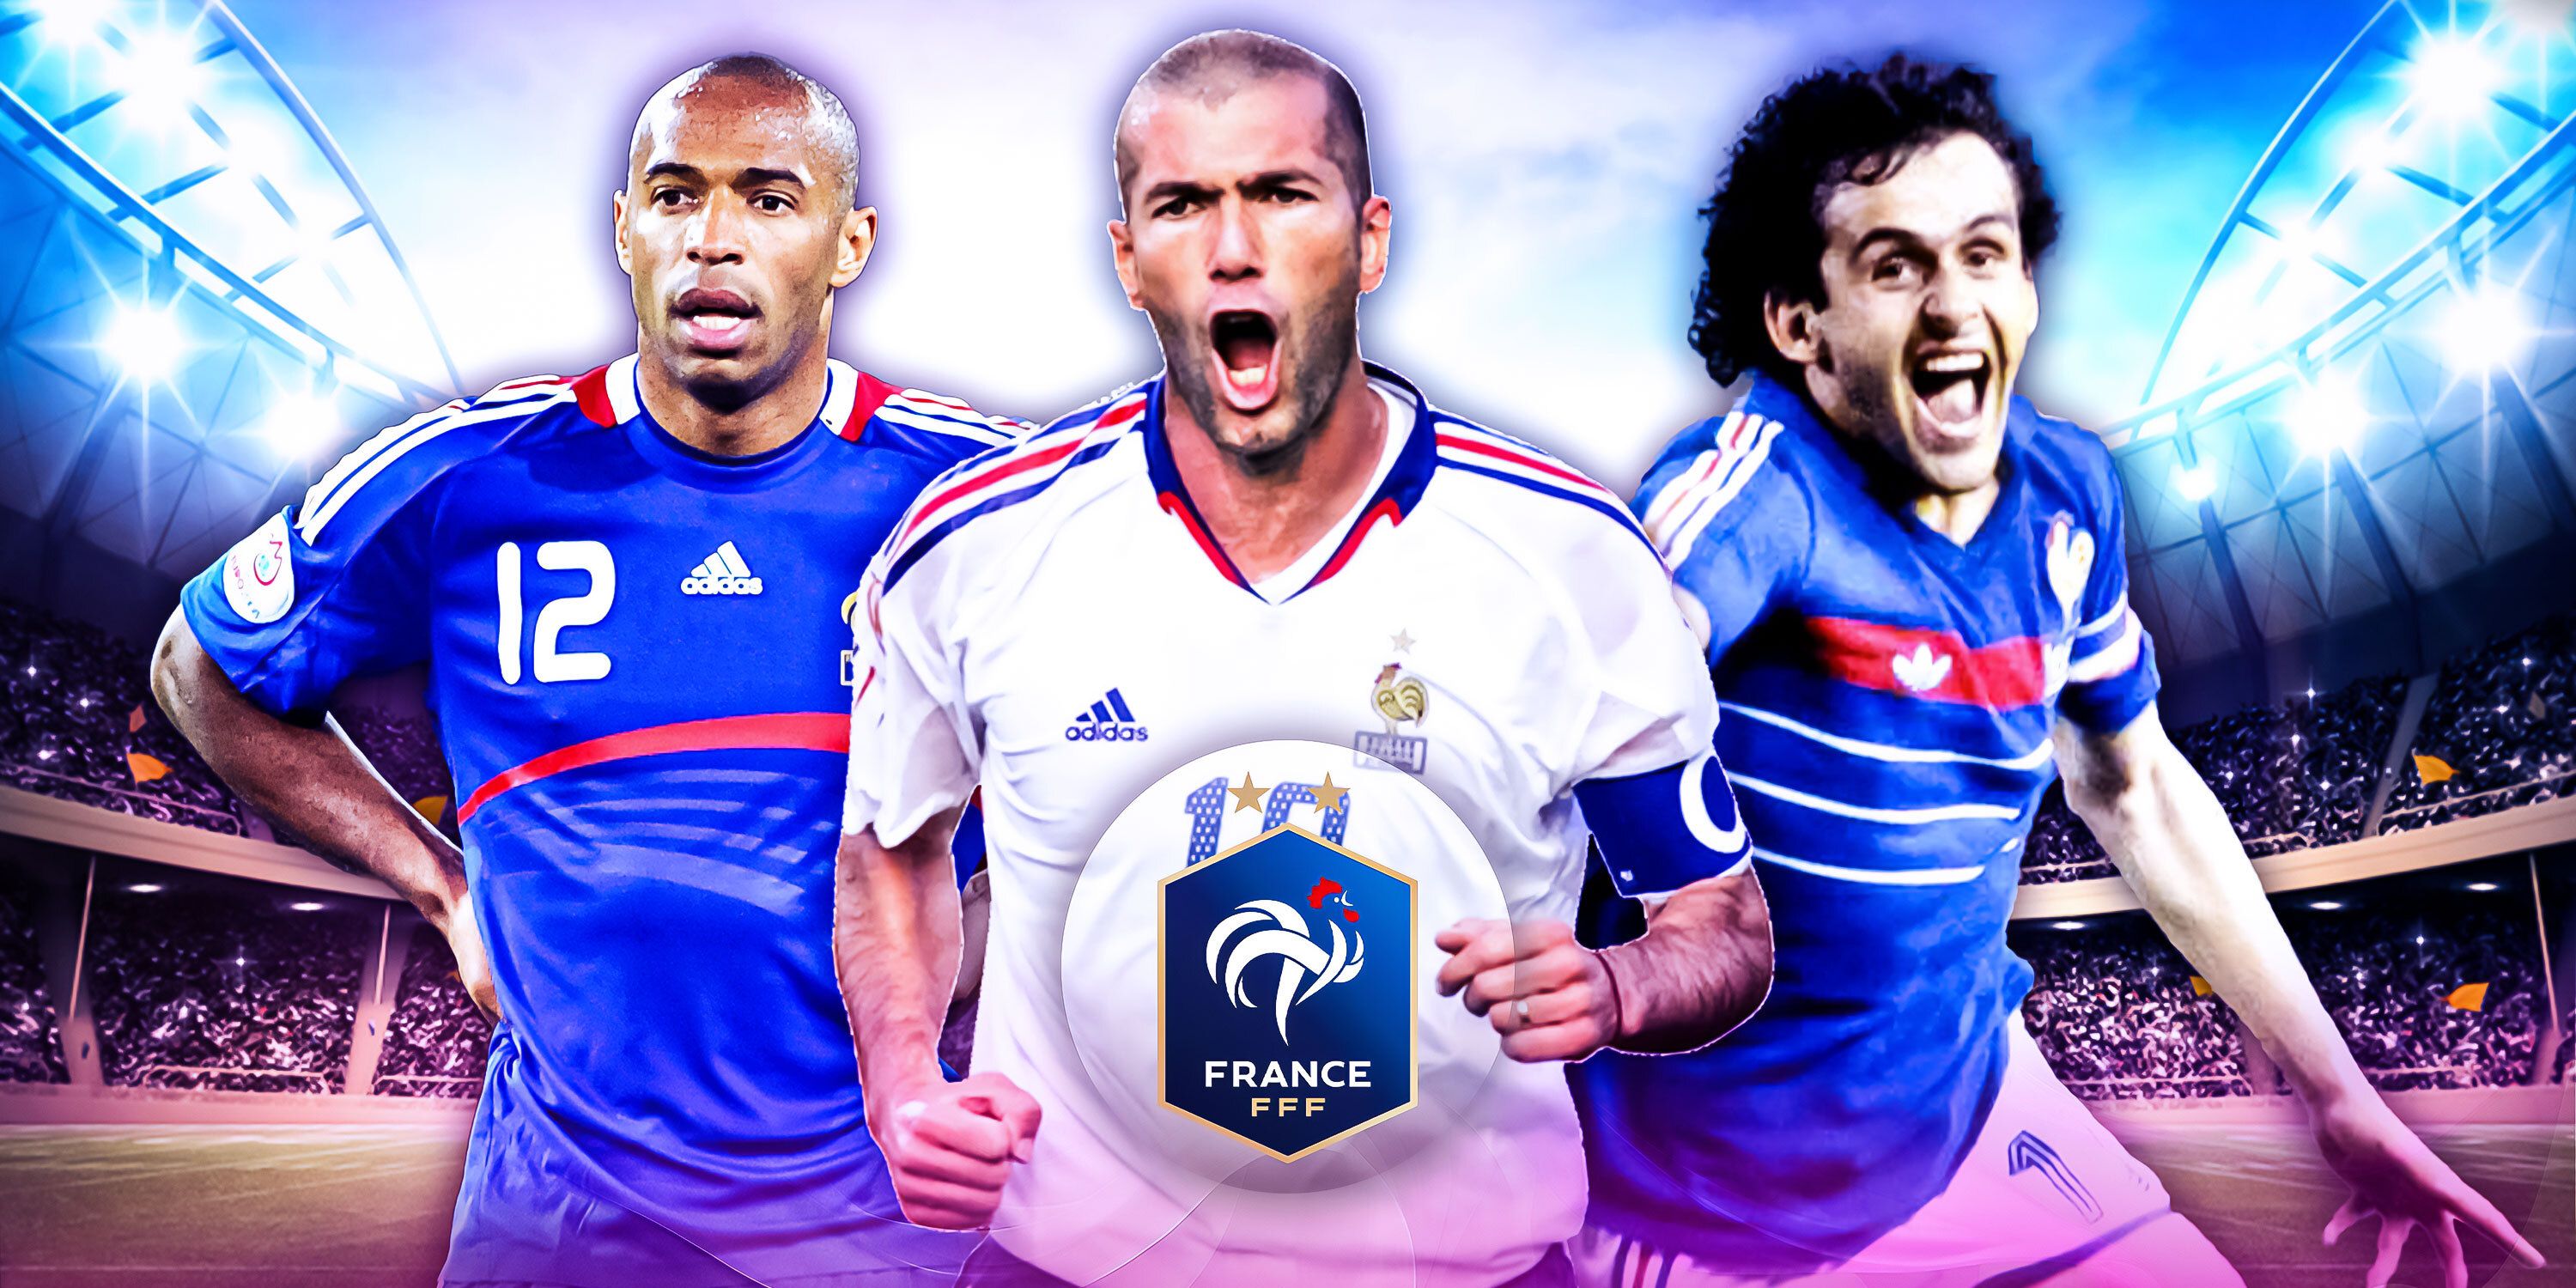 Zinedine Zidane, Michel Platini and Thierry Henry all in French kit with French football iconography